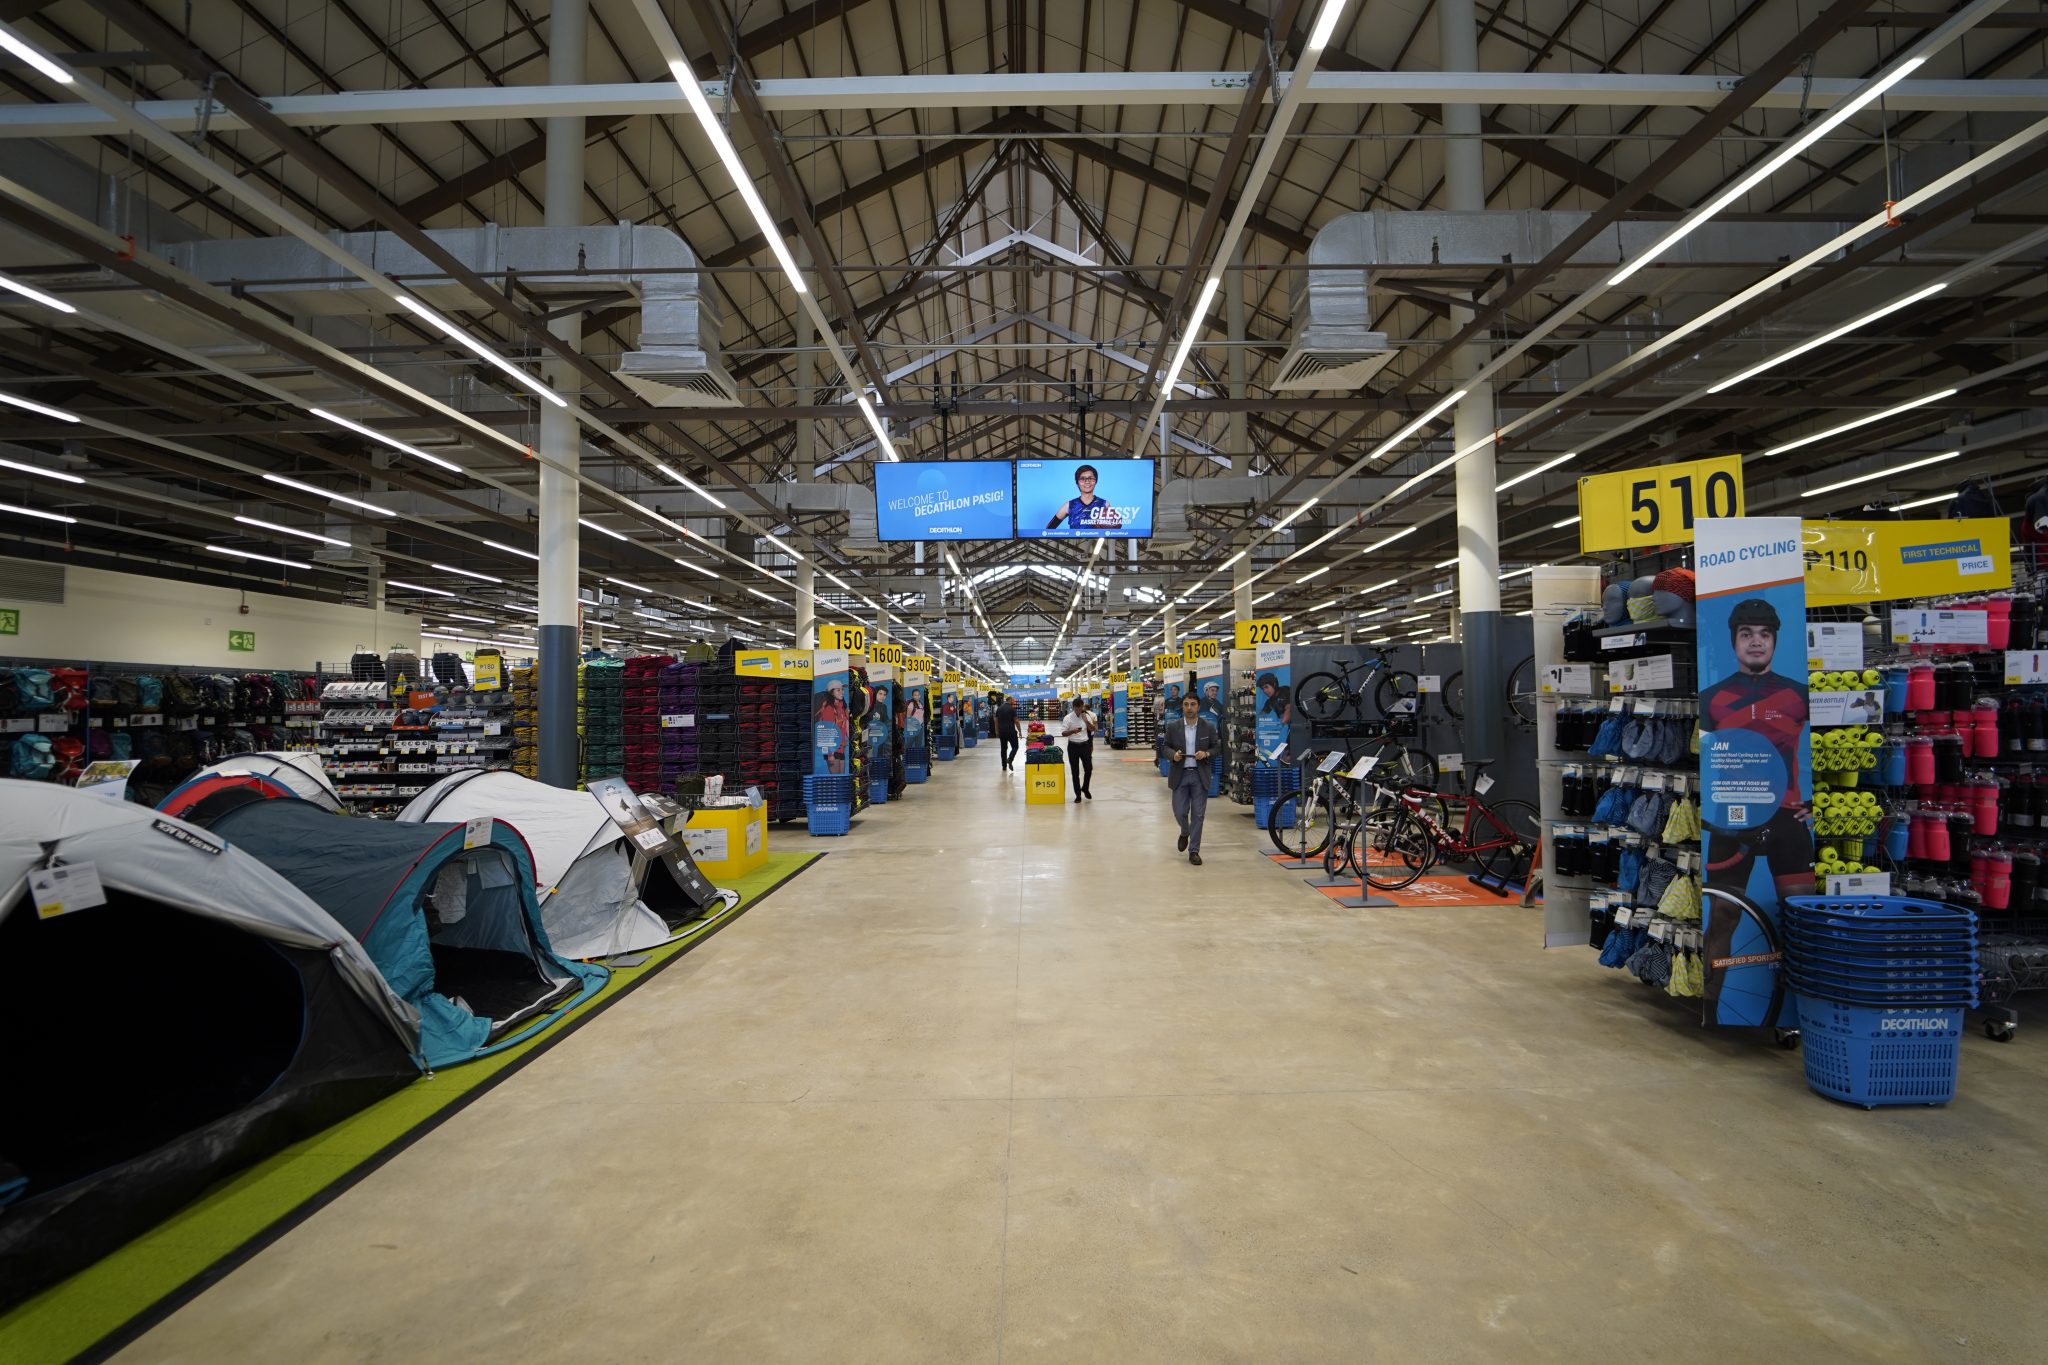 Decathlon is a fully integrated company with dedicated teams that are responsible for the research, design, manufacturing, logistics, and testing of 40 different in-house products